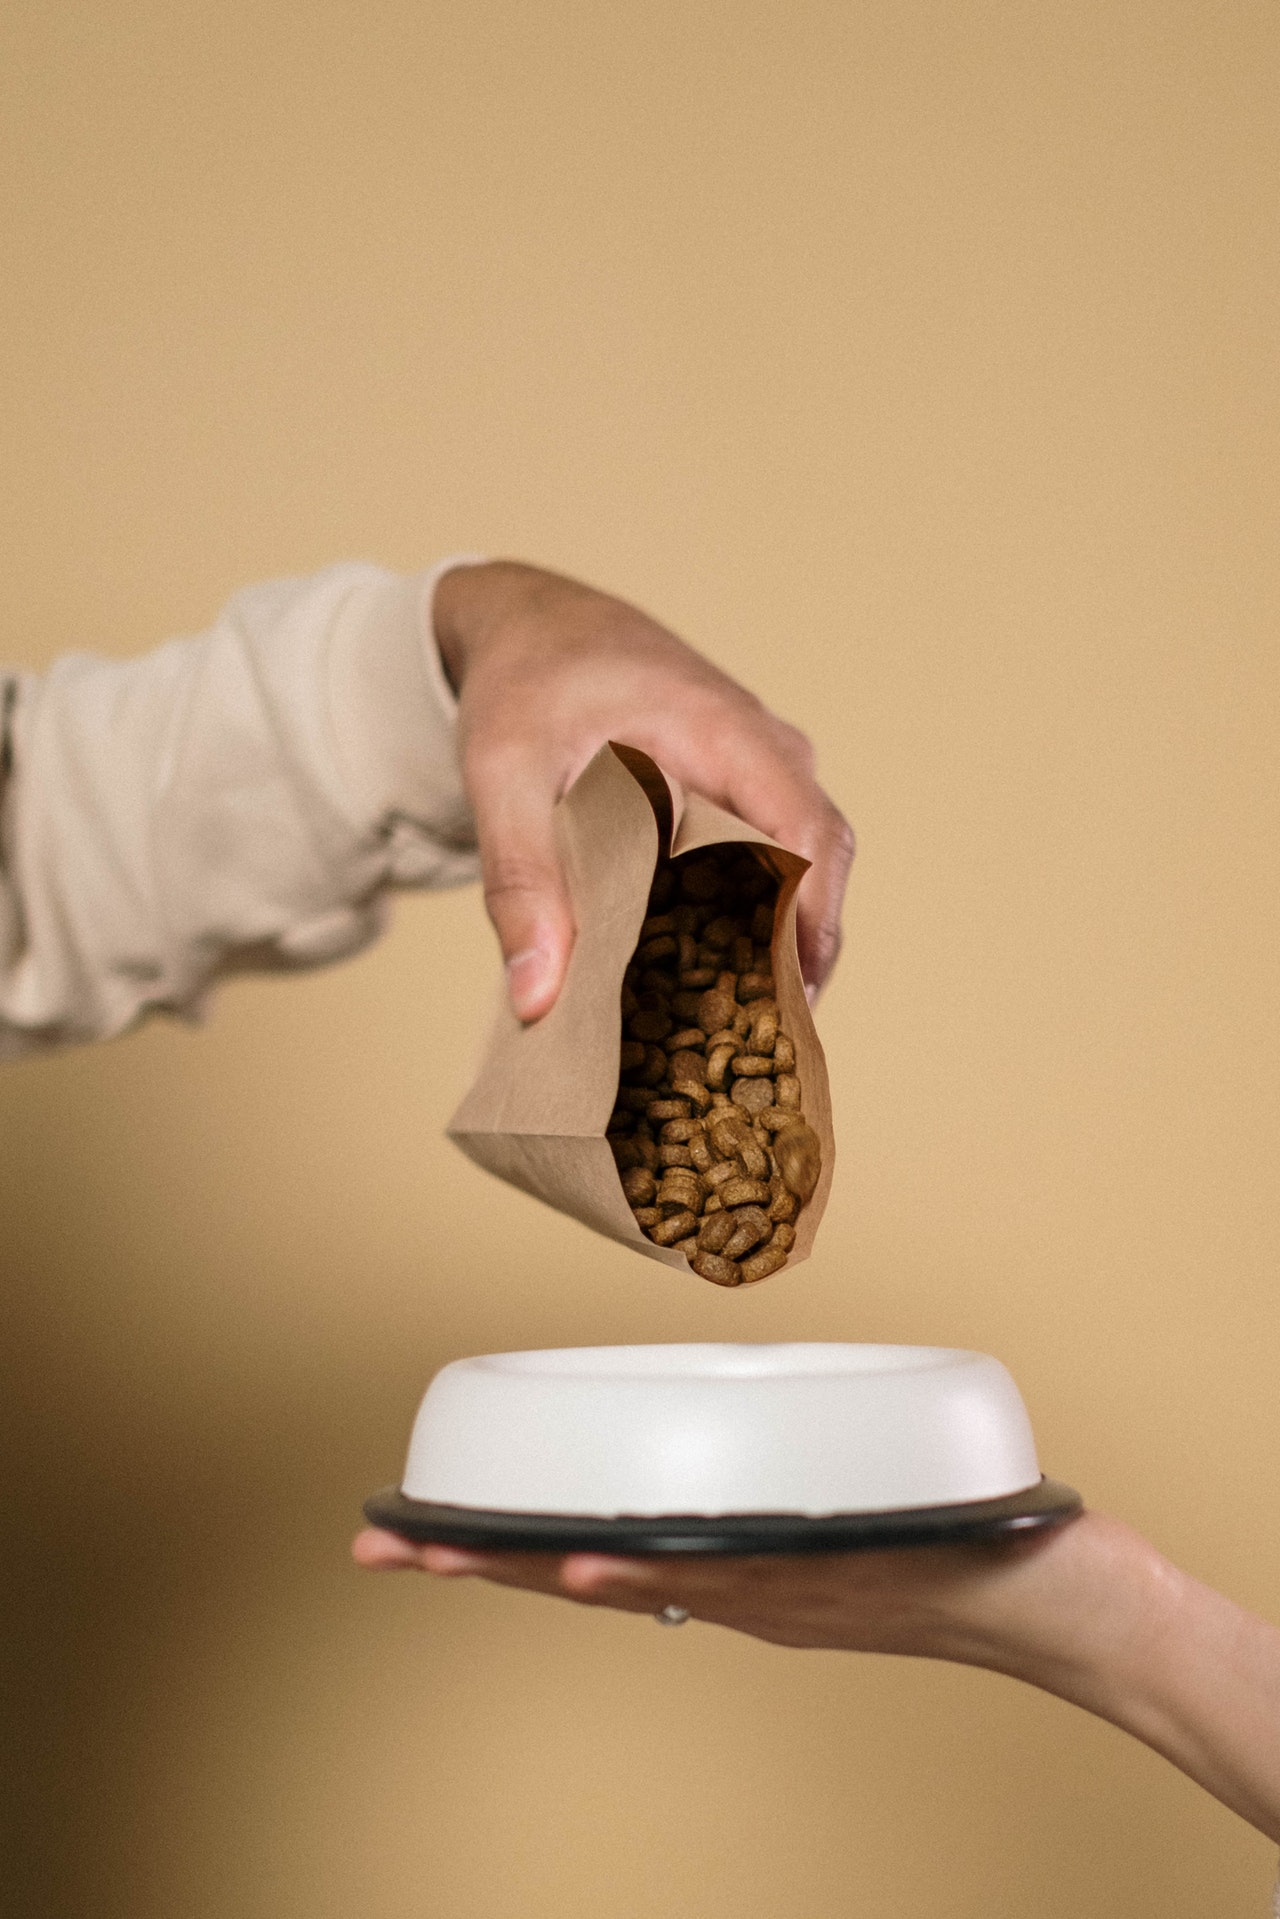 Pouring dog food into a bowl